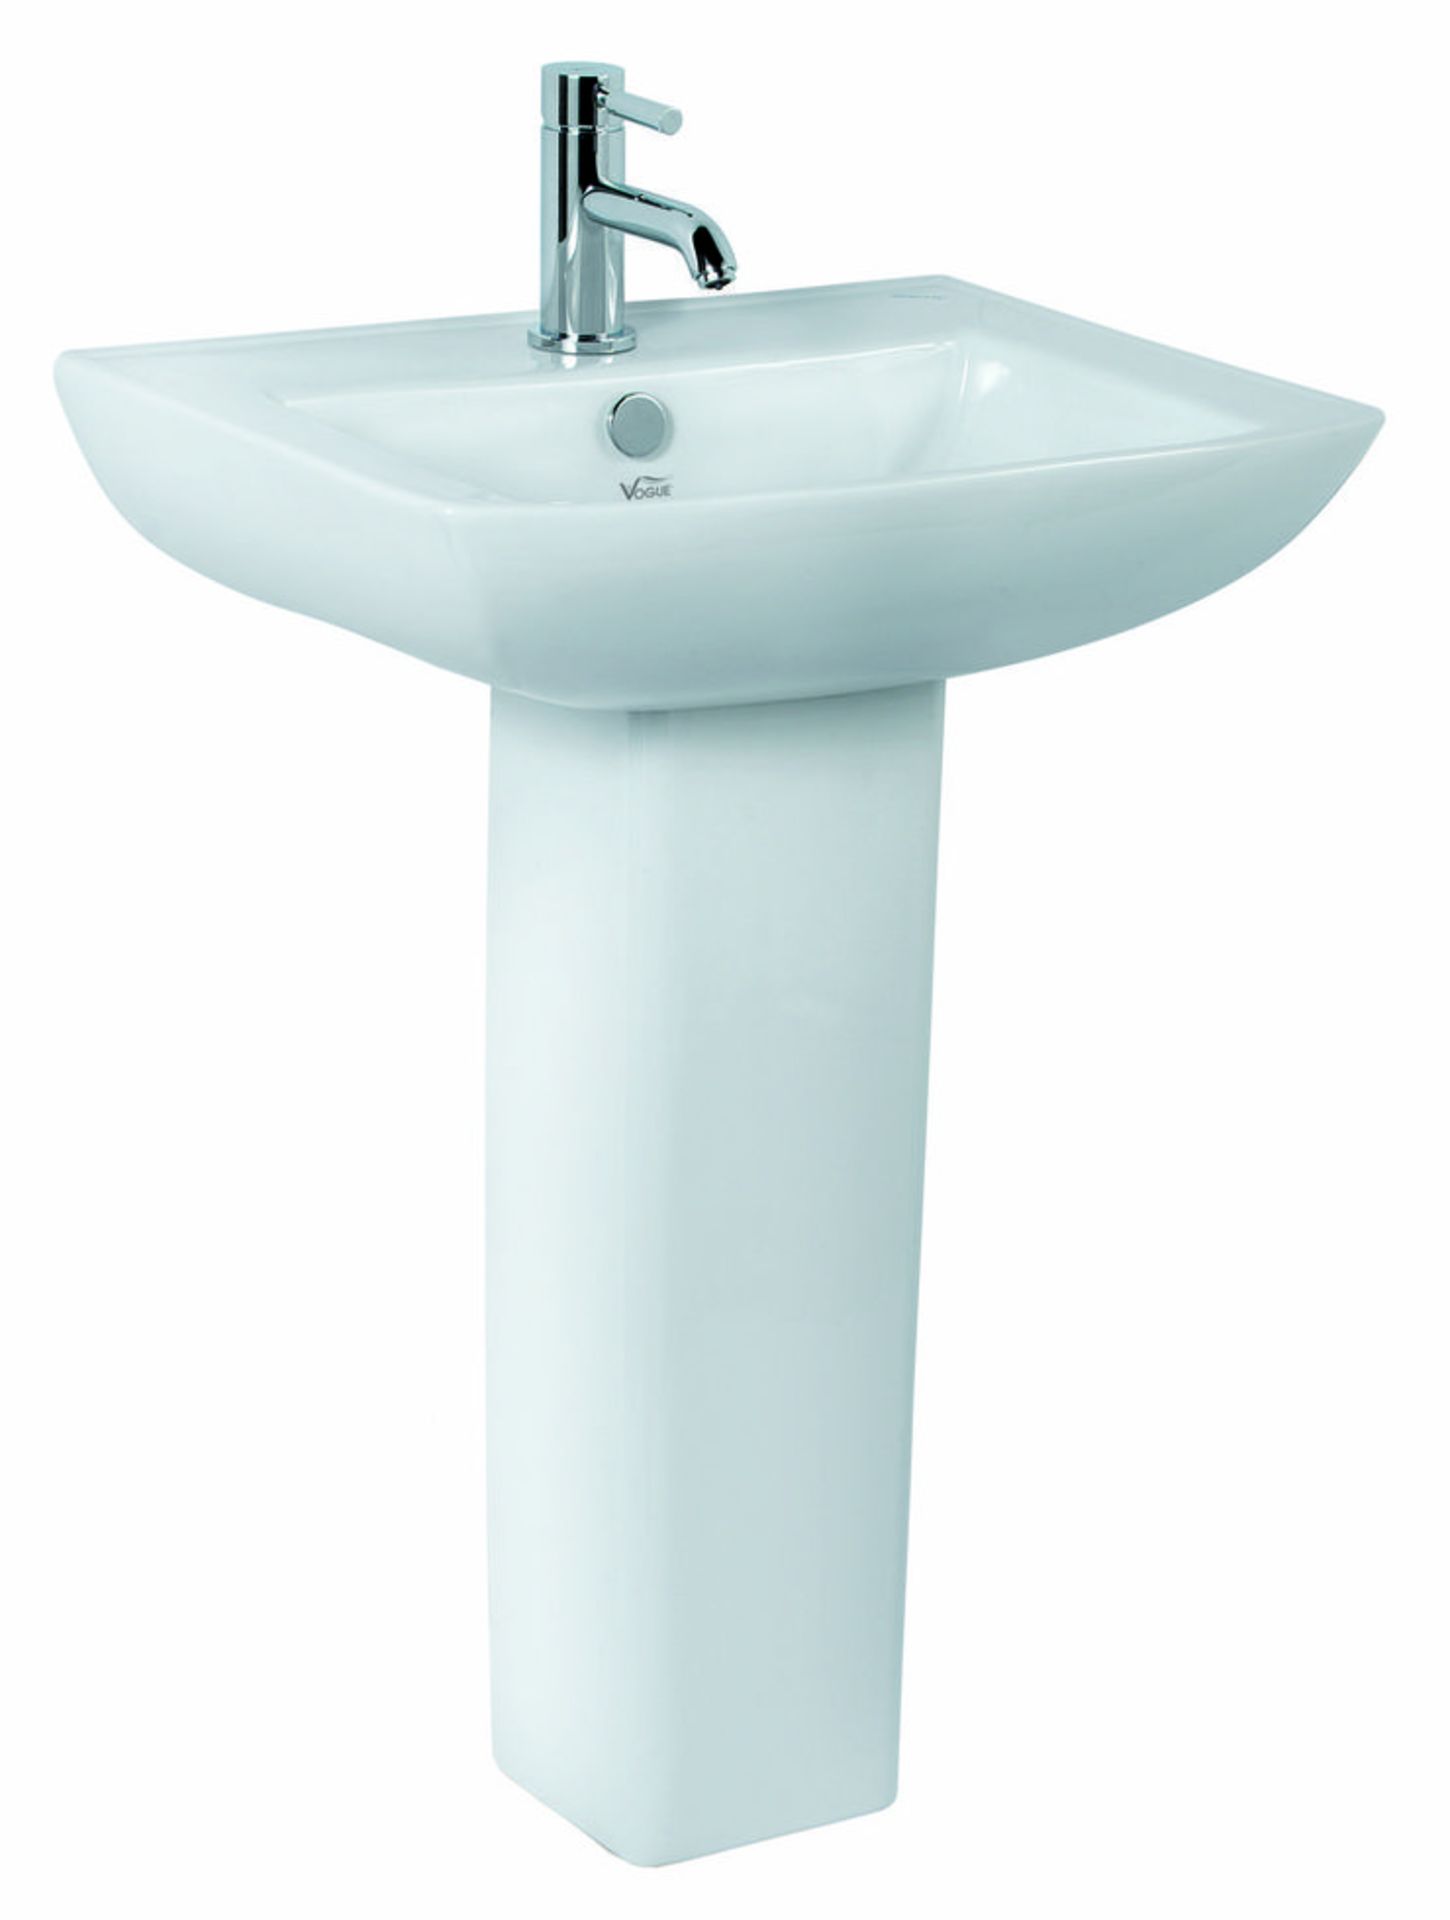 20 x Vogue Bathrooms CASOLI Single Tap Hole SINK BASINS With Pedestals - 600mm Width - Brand New - Image 2 of 2